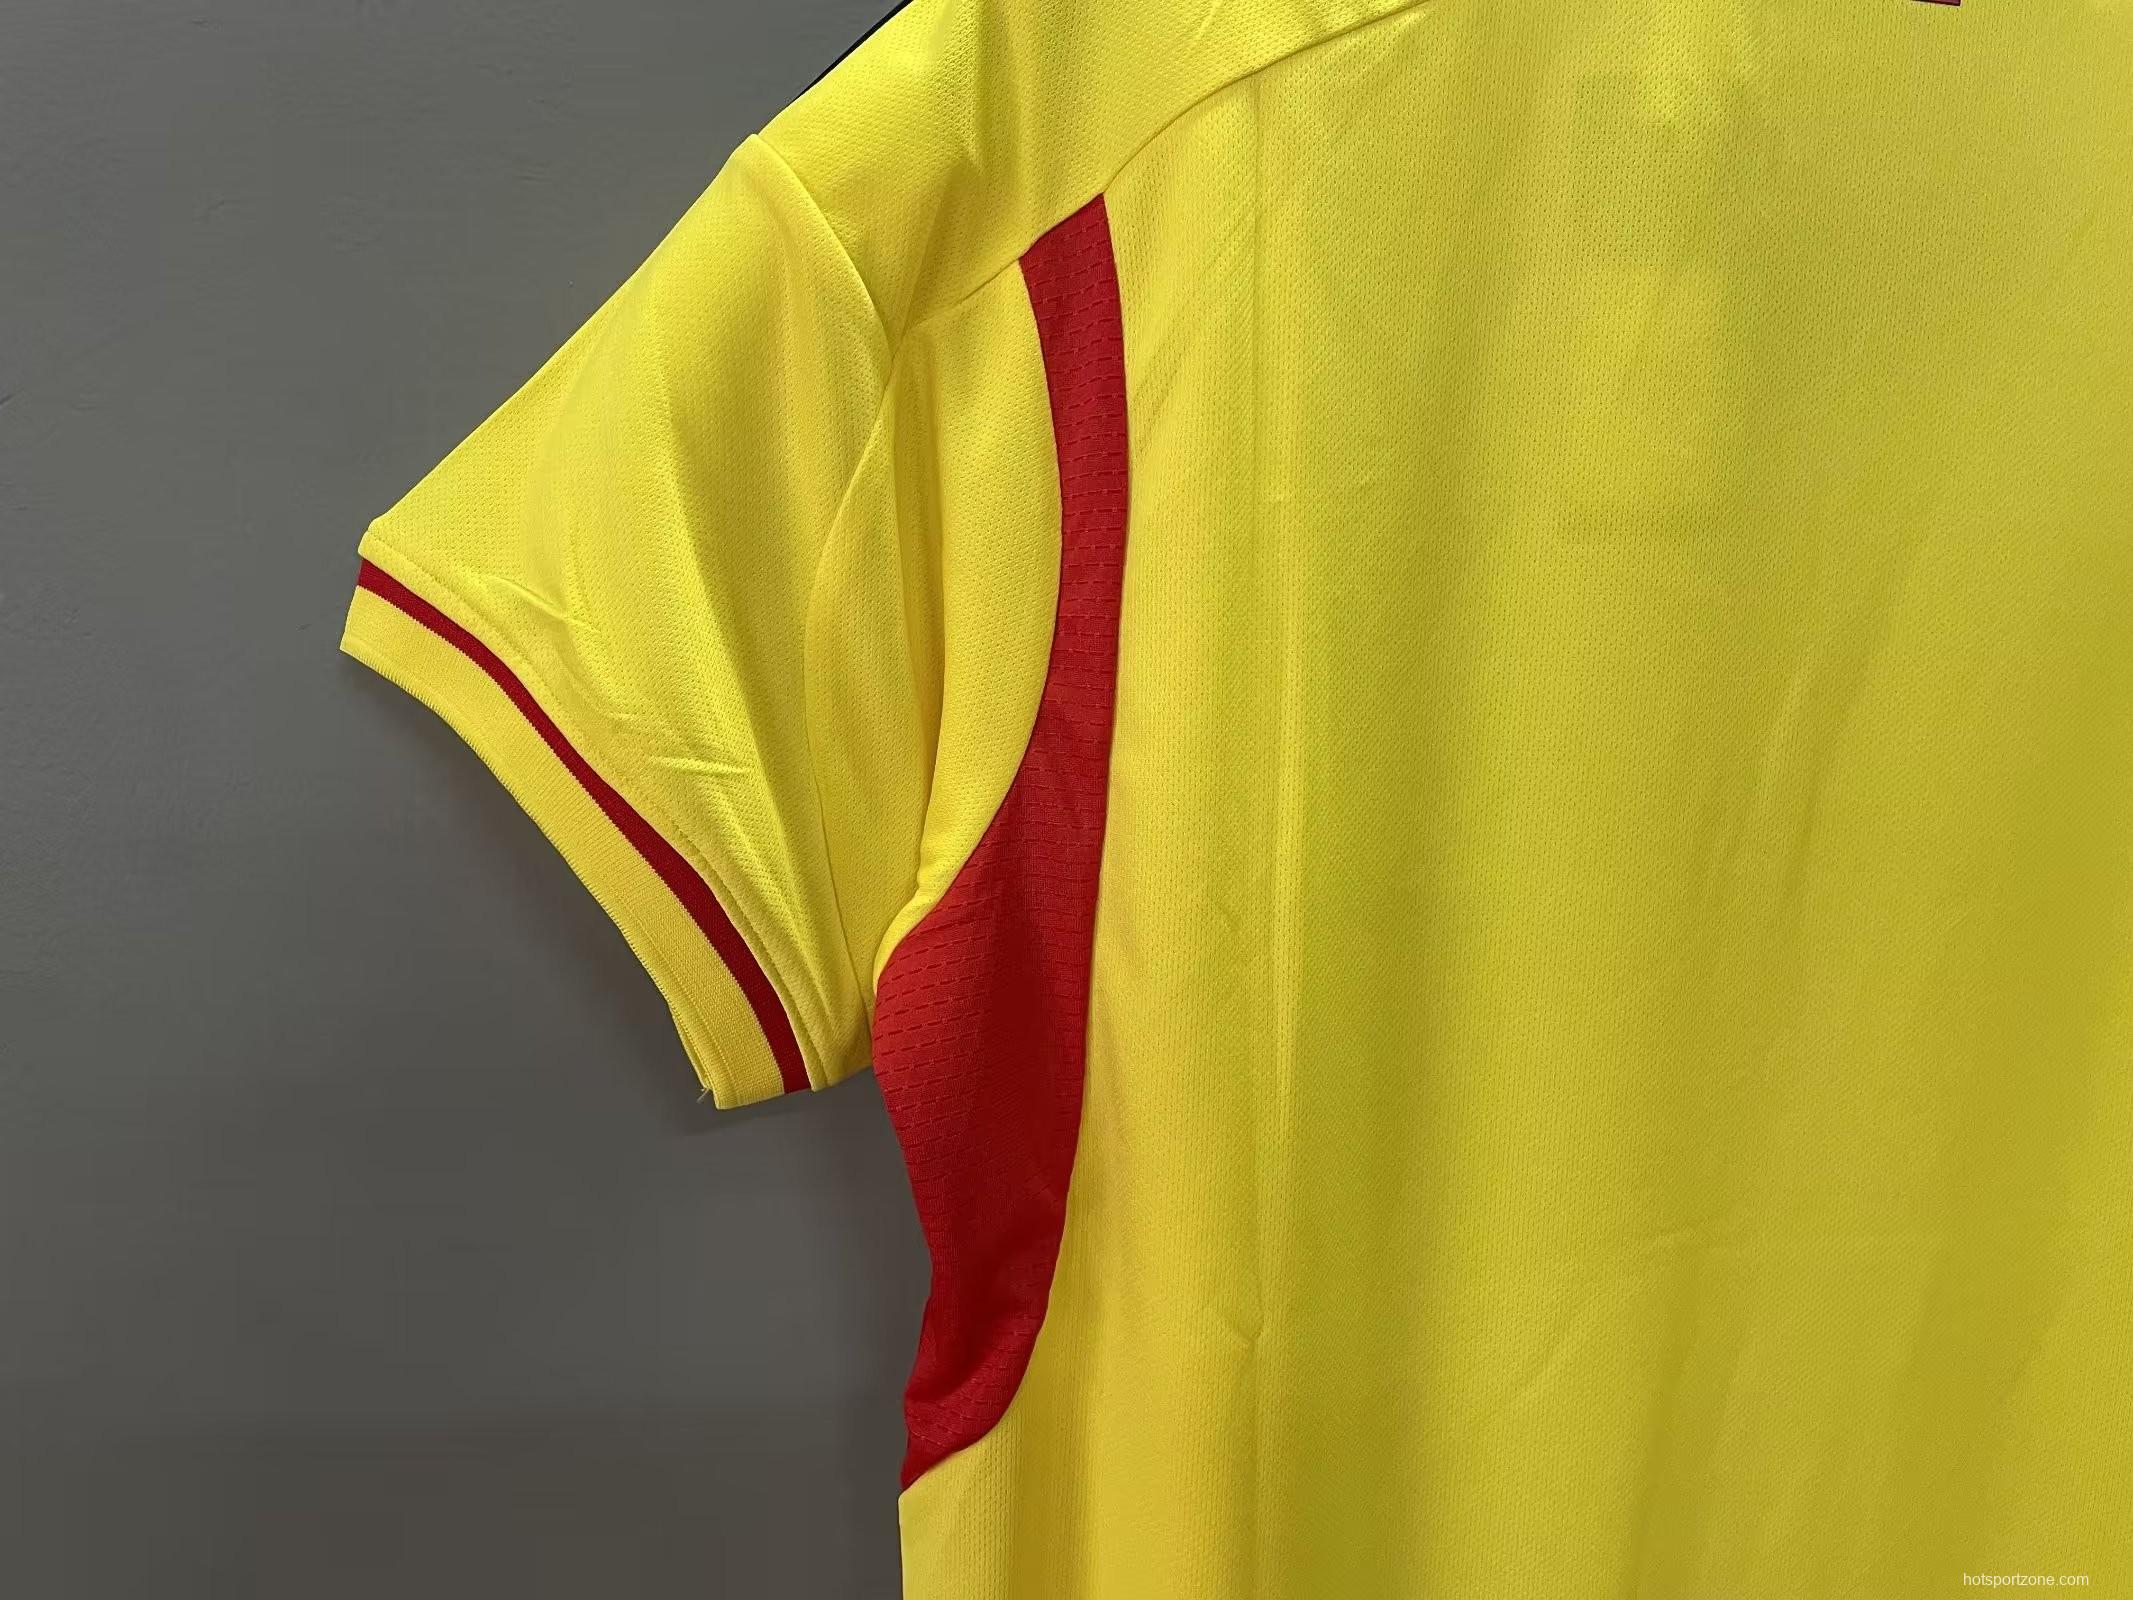 2023 Colombia Home Jersey